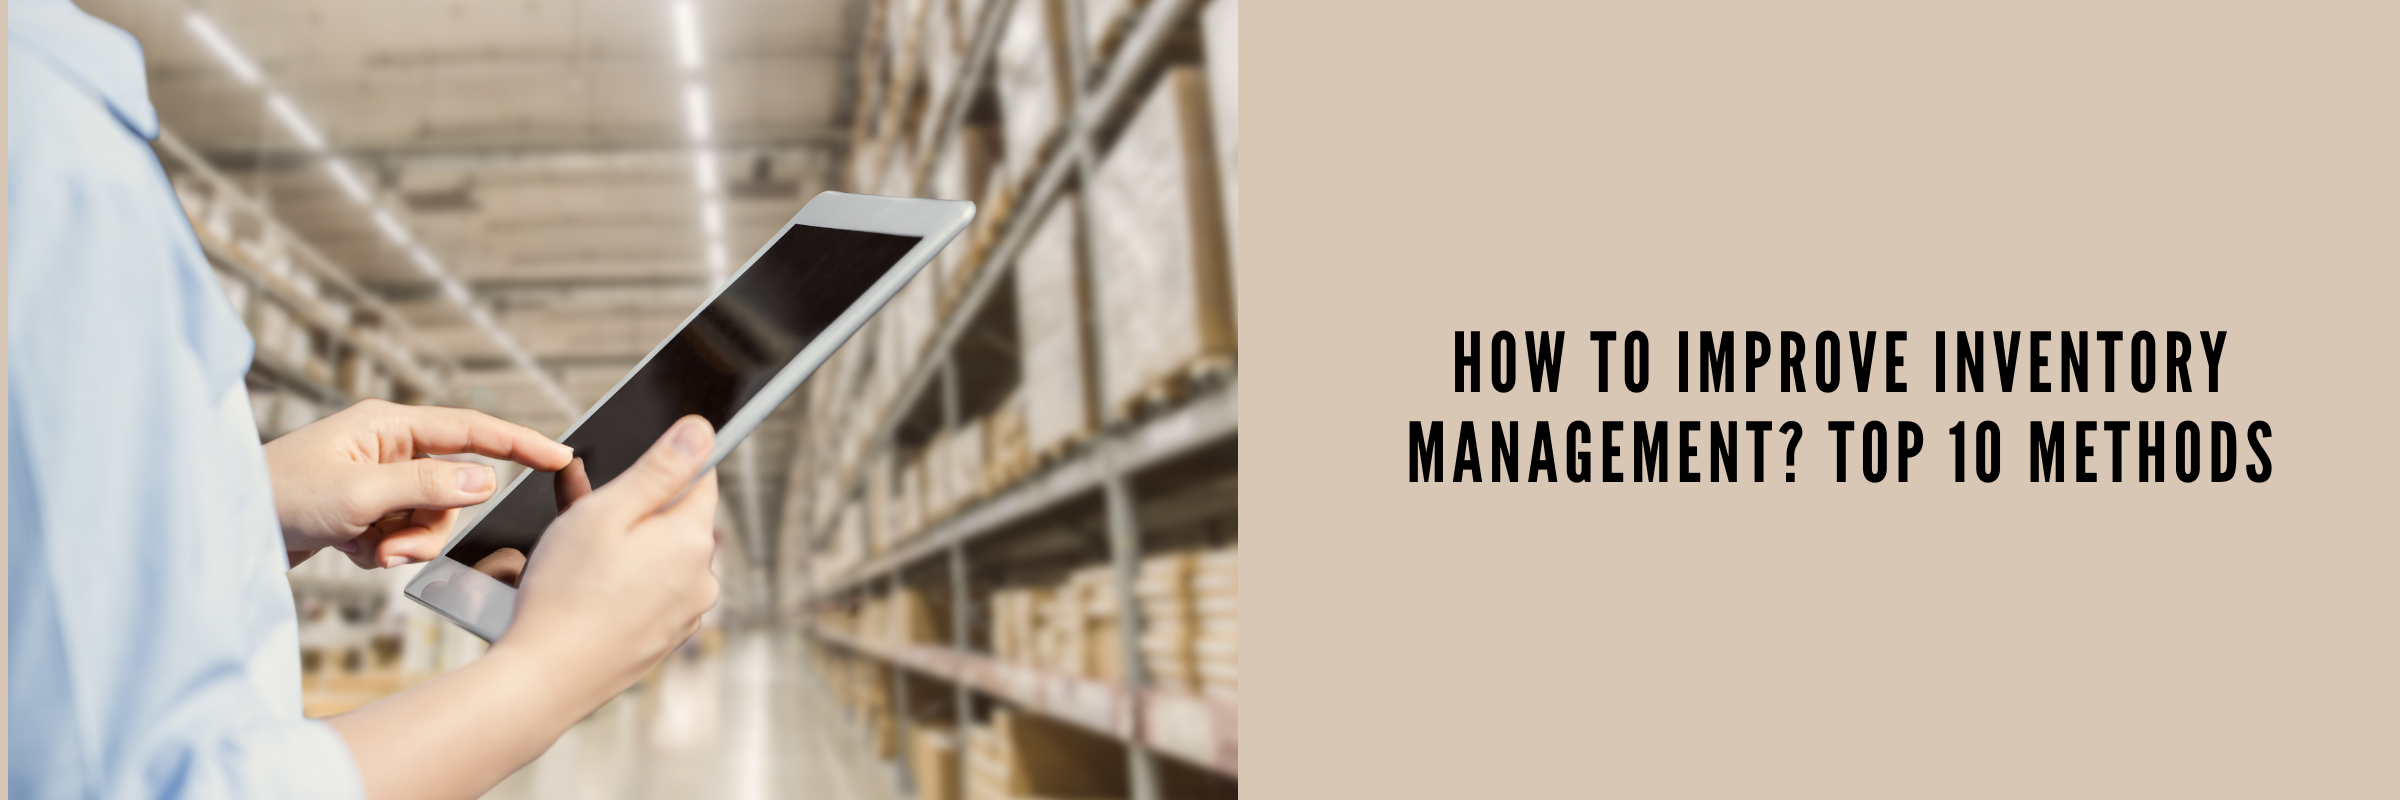 How to Improve Inventory Management? Top 10 Methods